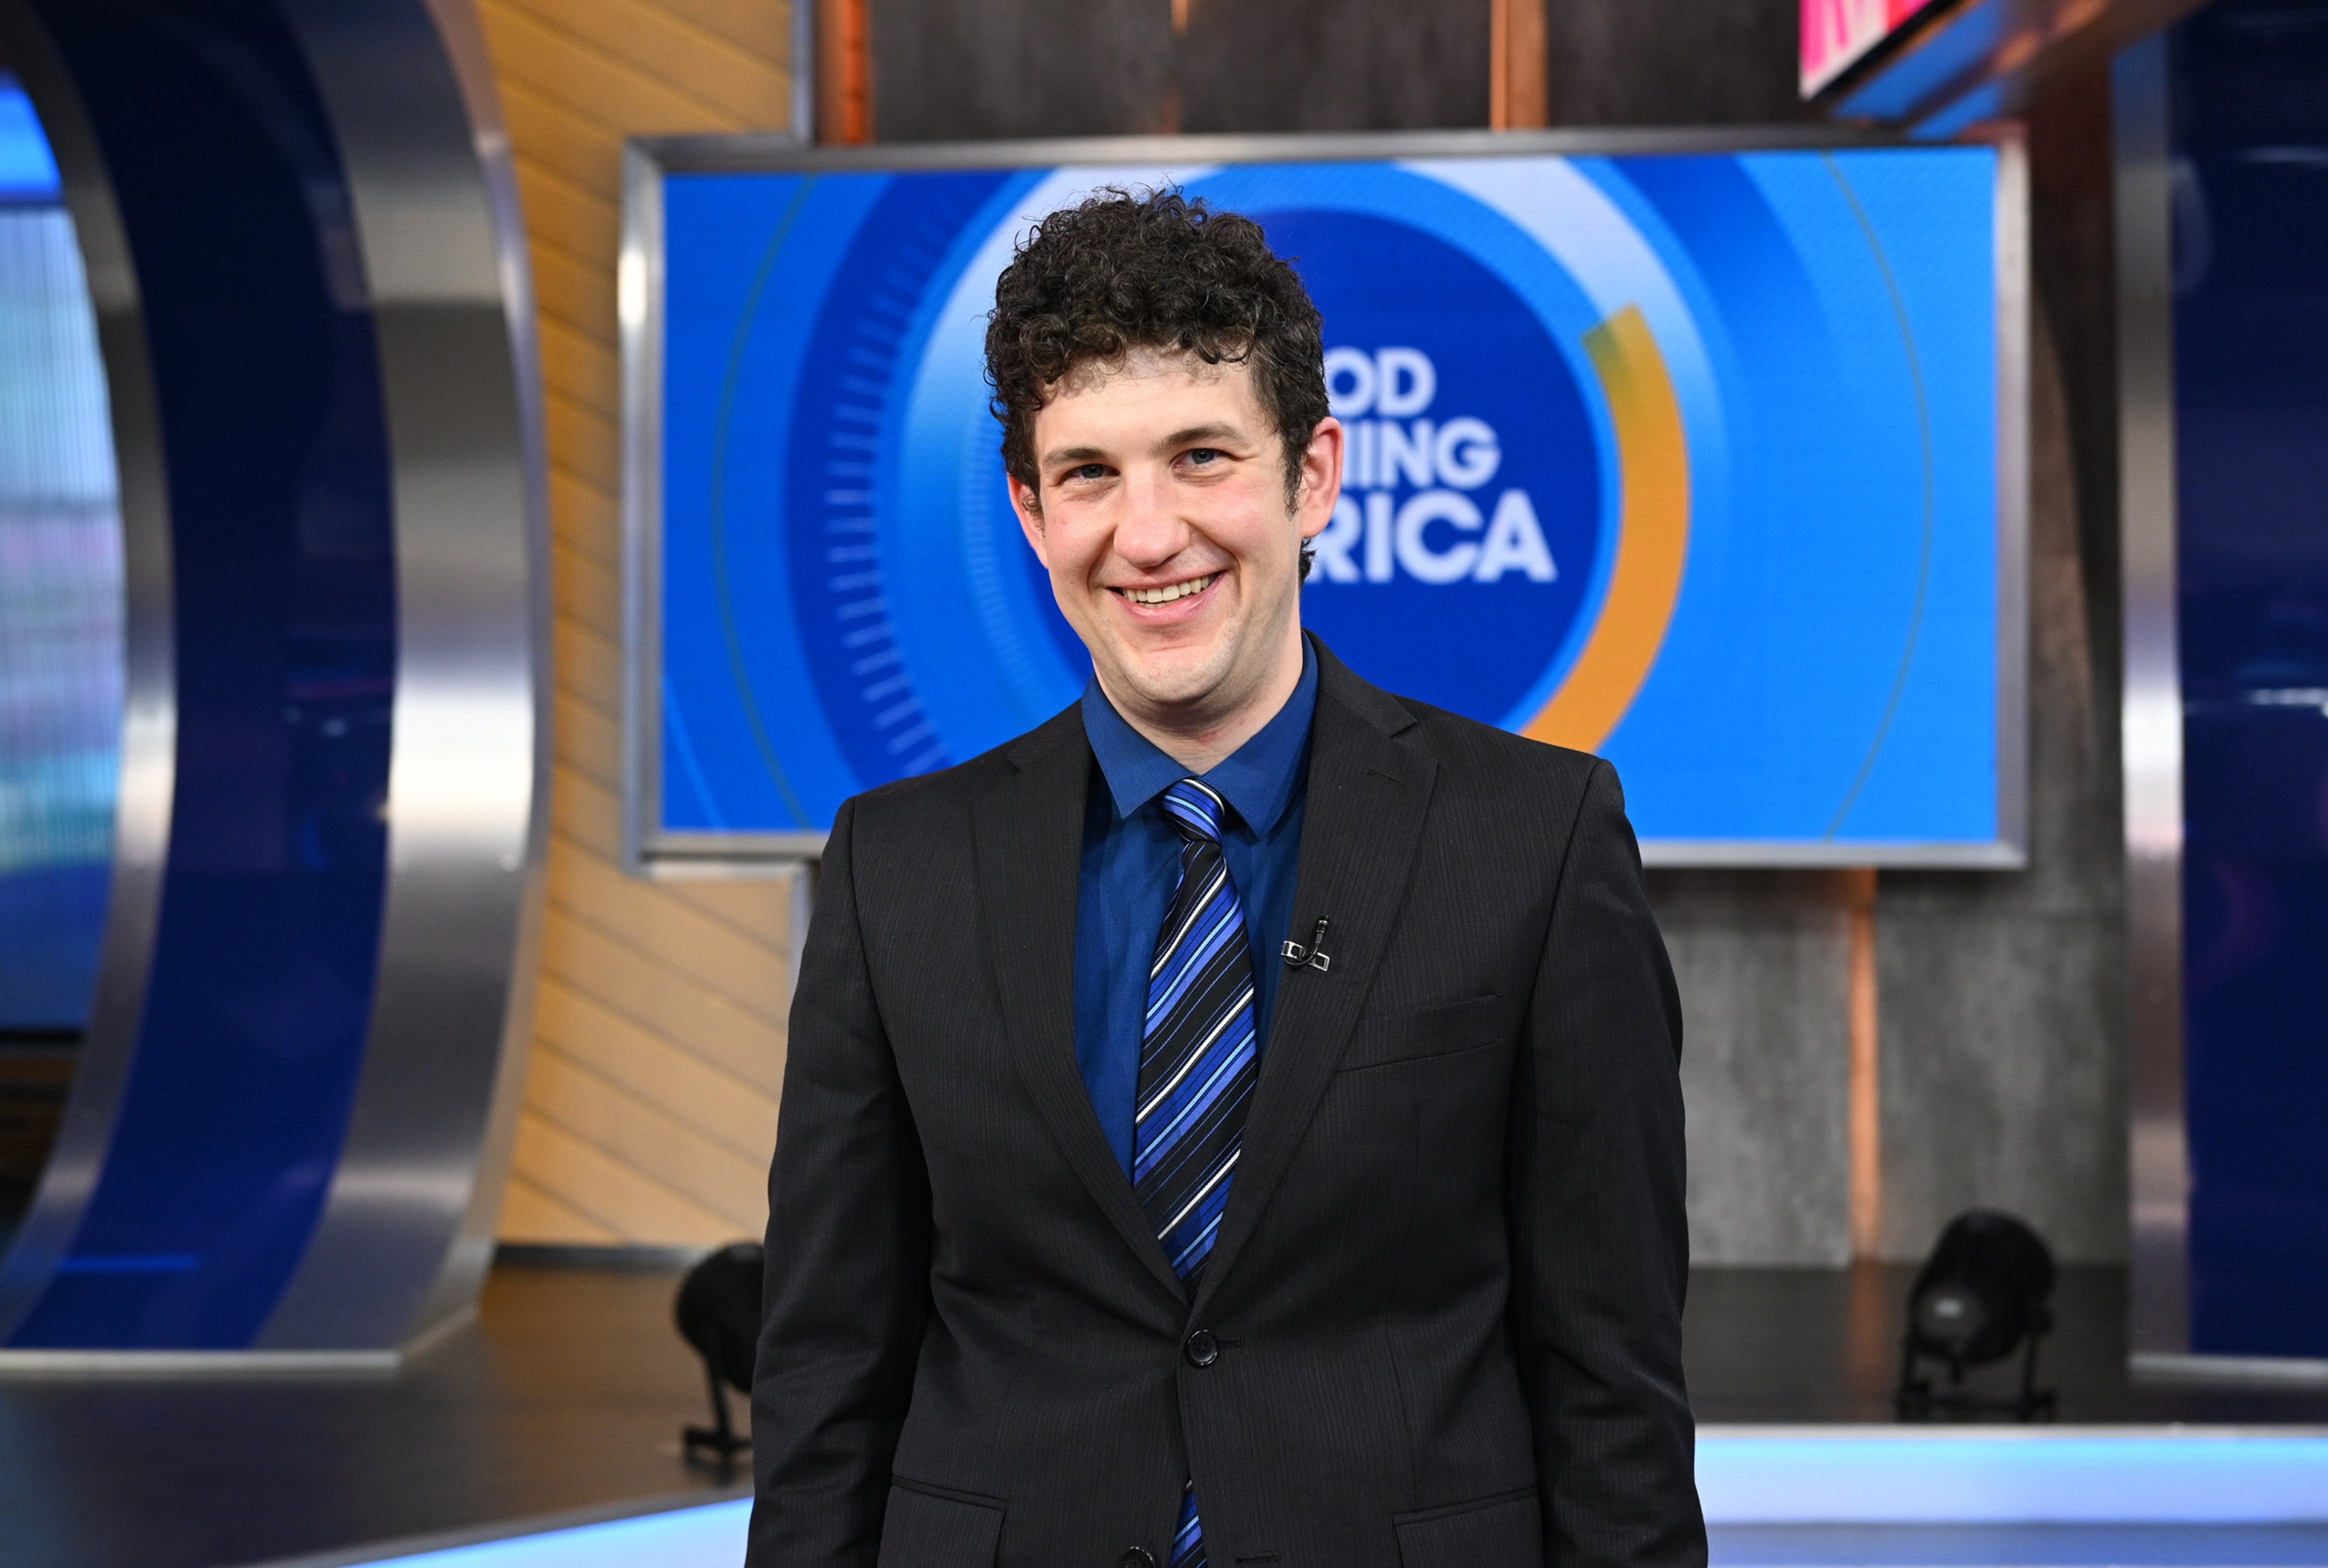 'Jeopardy!' champ Matt Amodio is a guest on 'Good Morning America' 